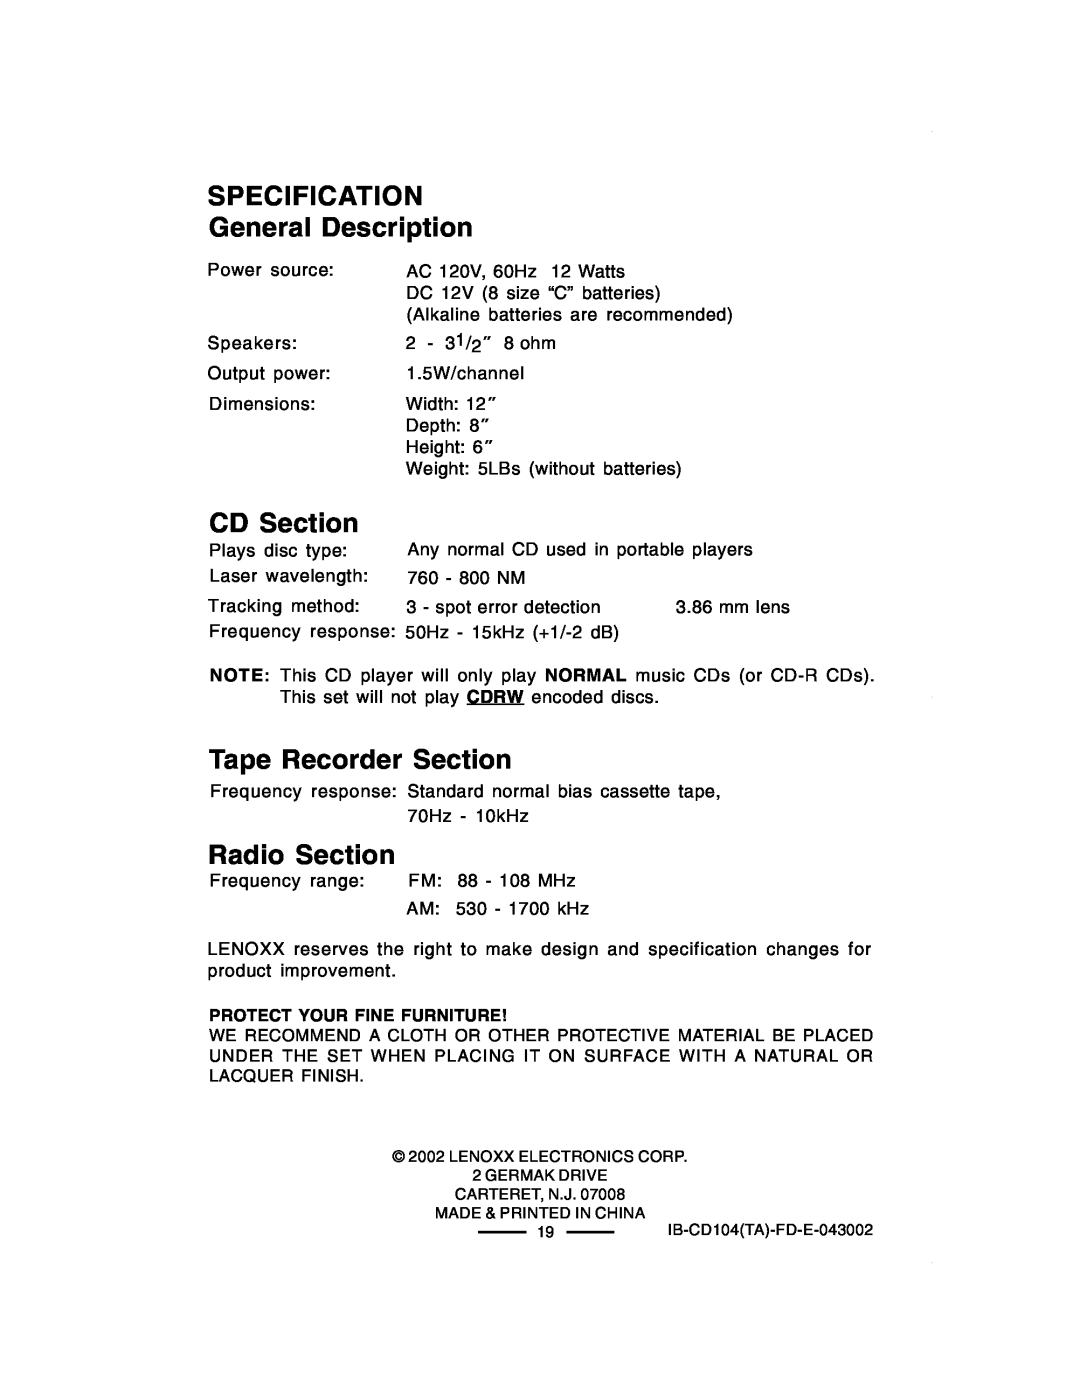 Lenoxx Electronics CD-104 manual SPECIFICATION General Description, CD Section, Tape Recorder Section, Radio Section 